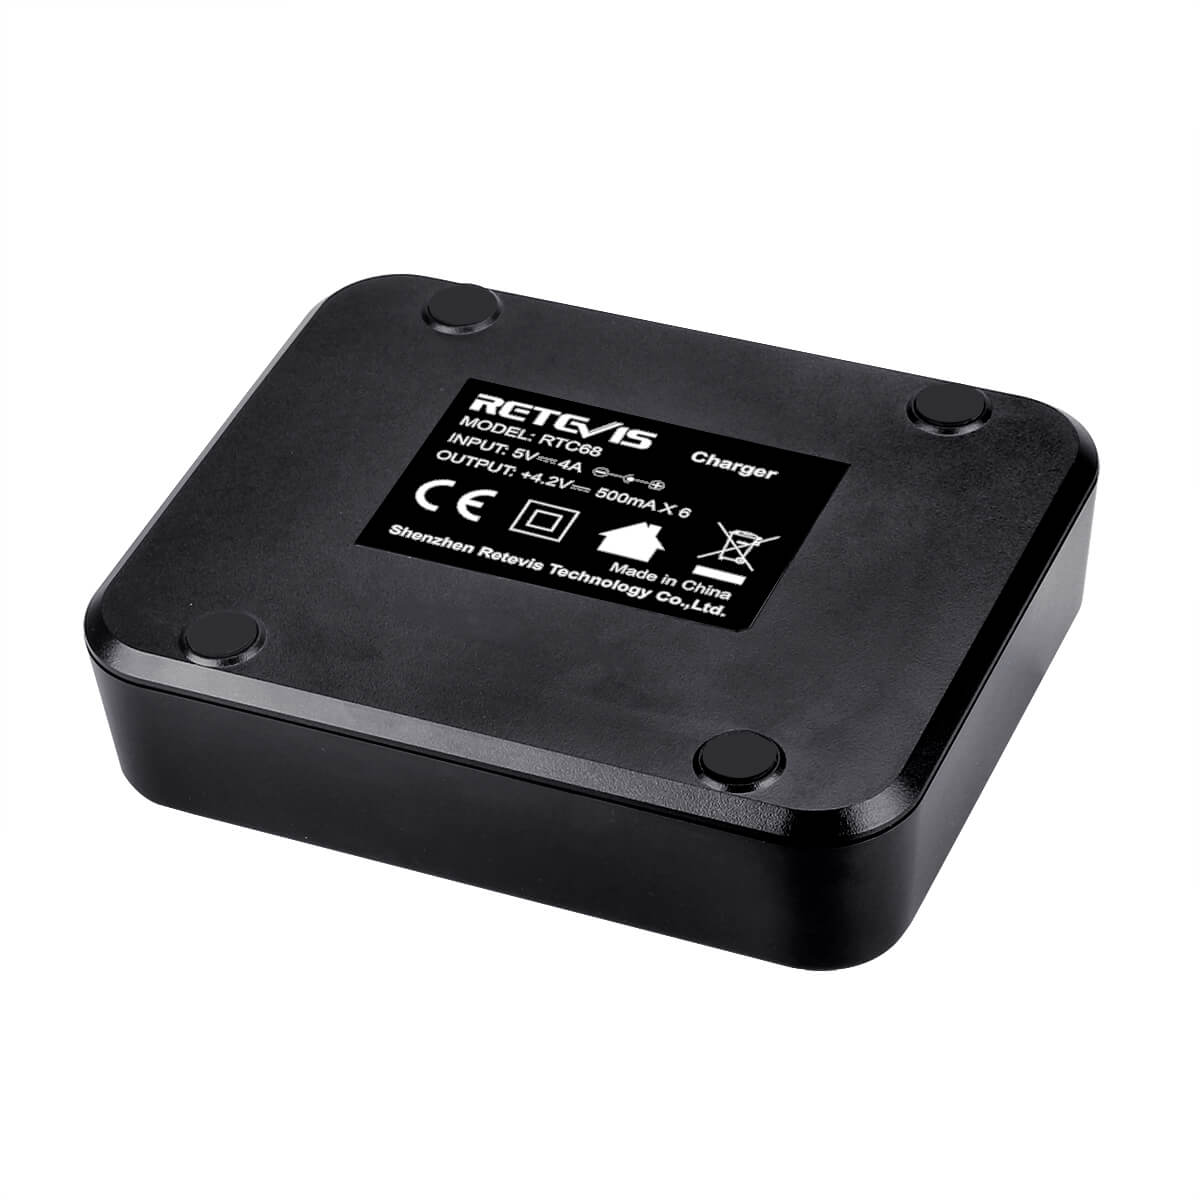 Retevis RTC68 Six-Bay Multi-Unit Charger for RT68/RT668